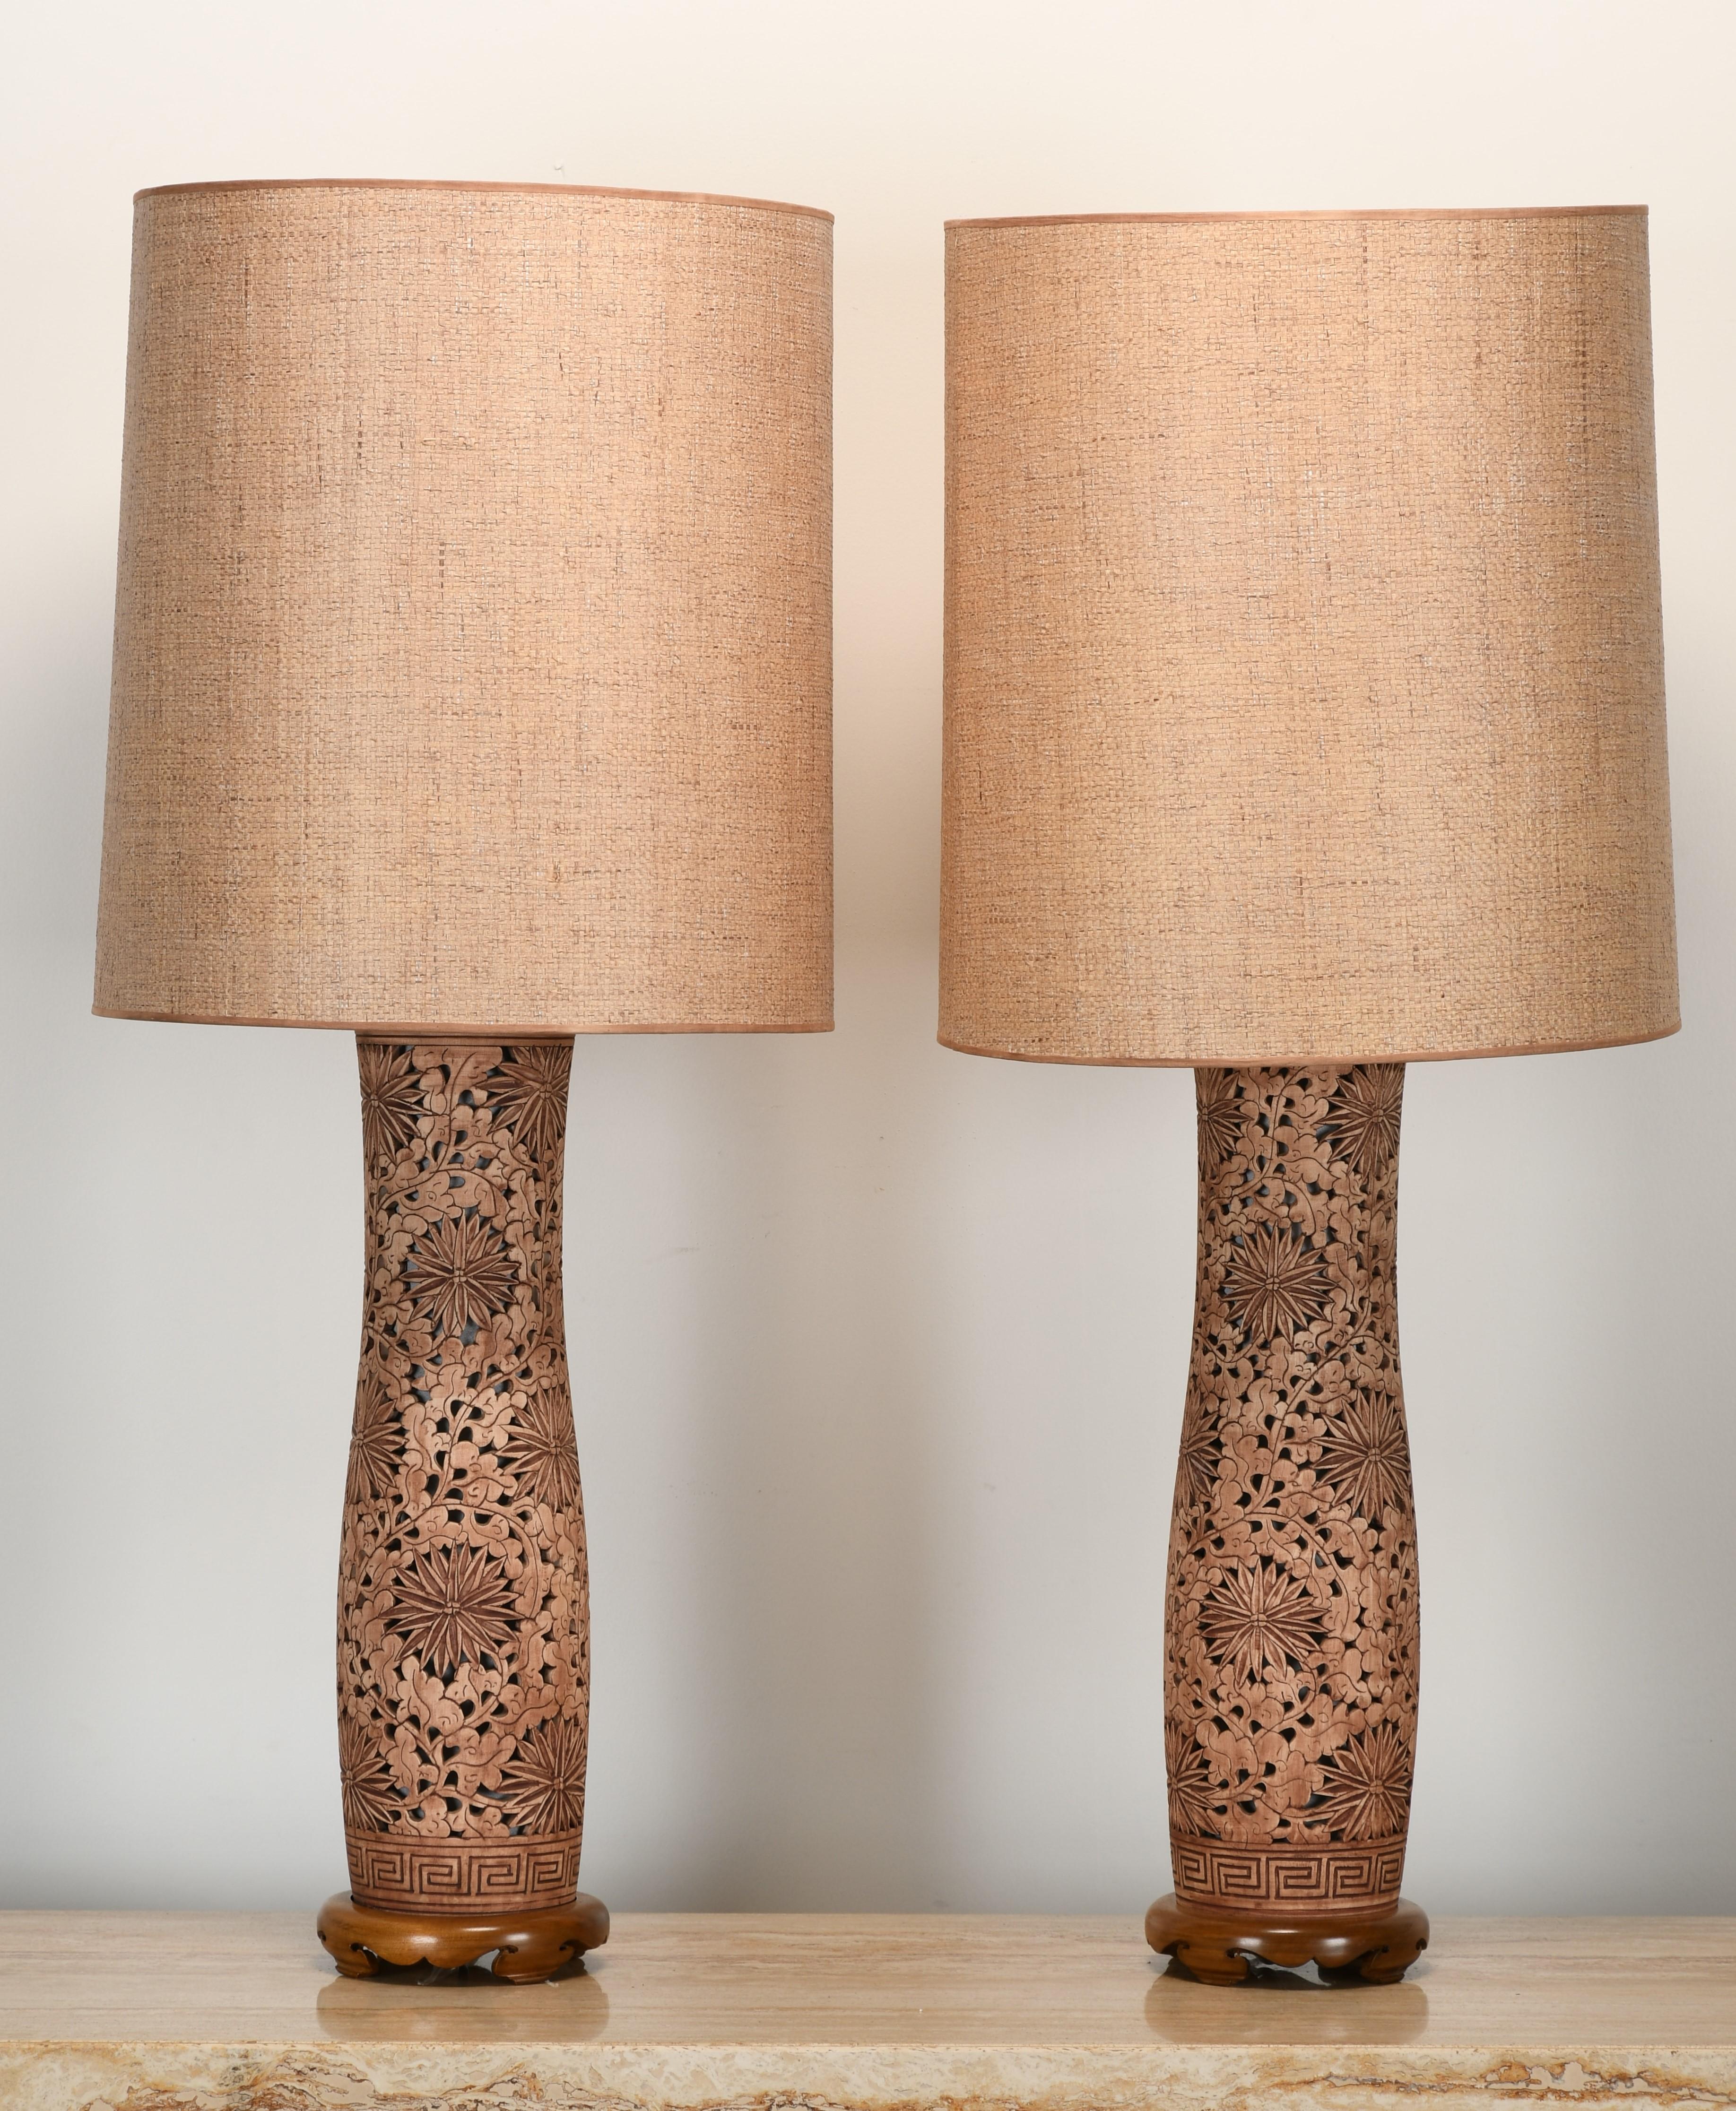 An organic modern pair of Asian table lamps that make a statement. These lamps are stunning with their reticulated body and burlap natural frame lamp shade. Possibly Japanese or Asian origin. The beautifully lit base accentuates the design. Shades